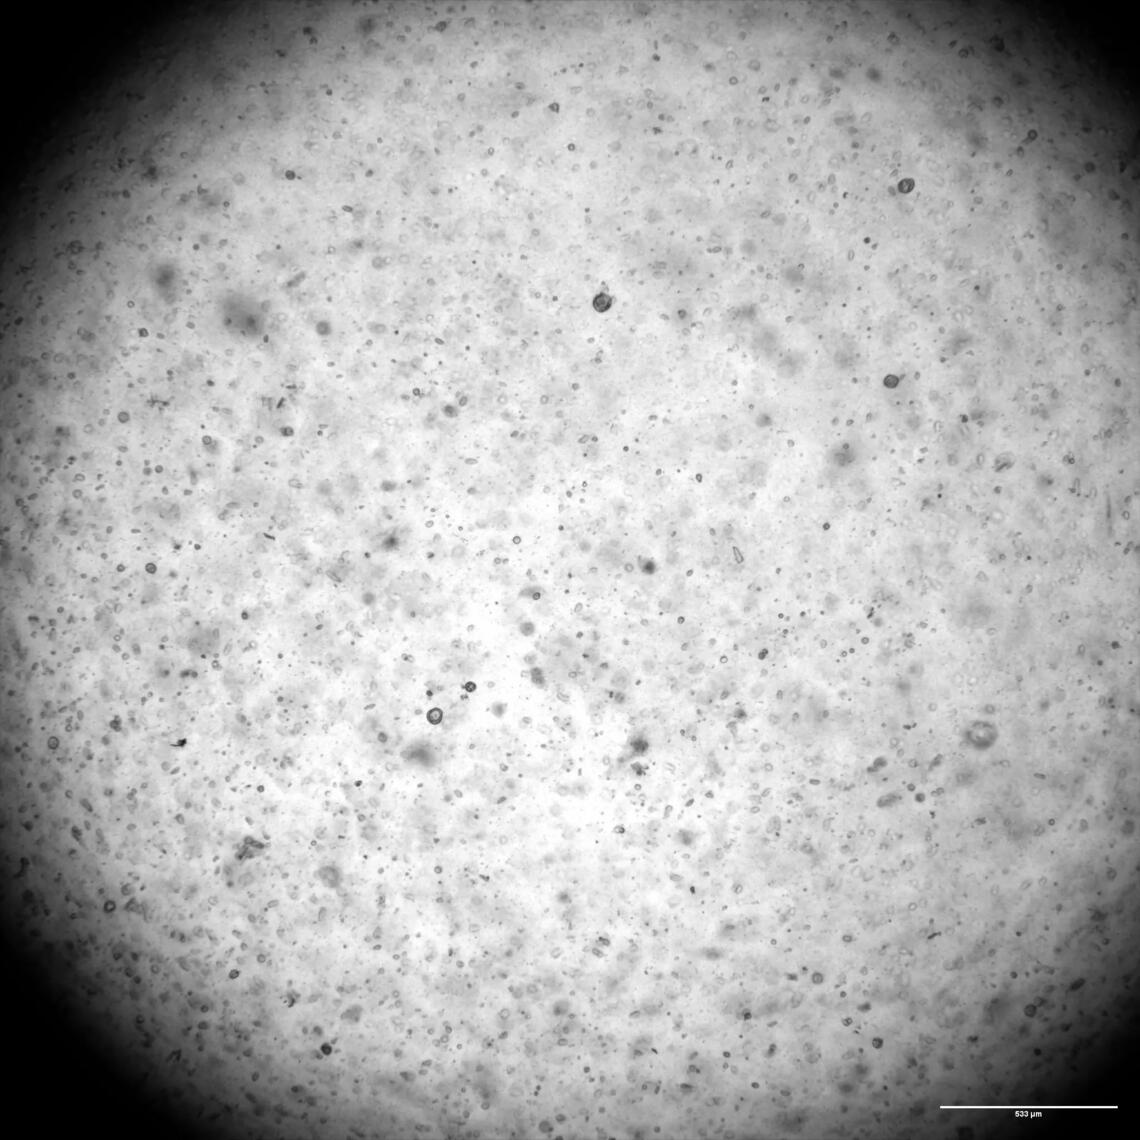 A black and white image of a sample through a telescope